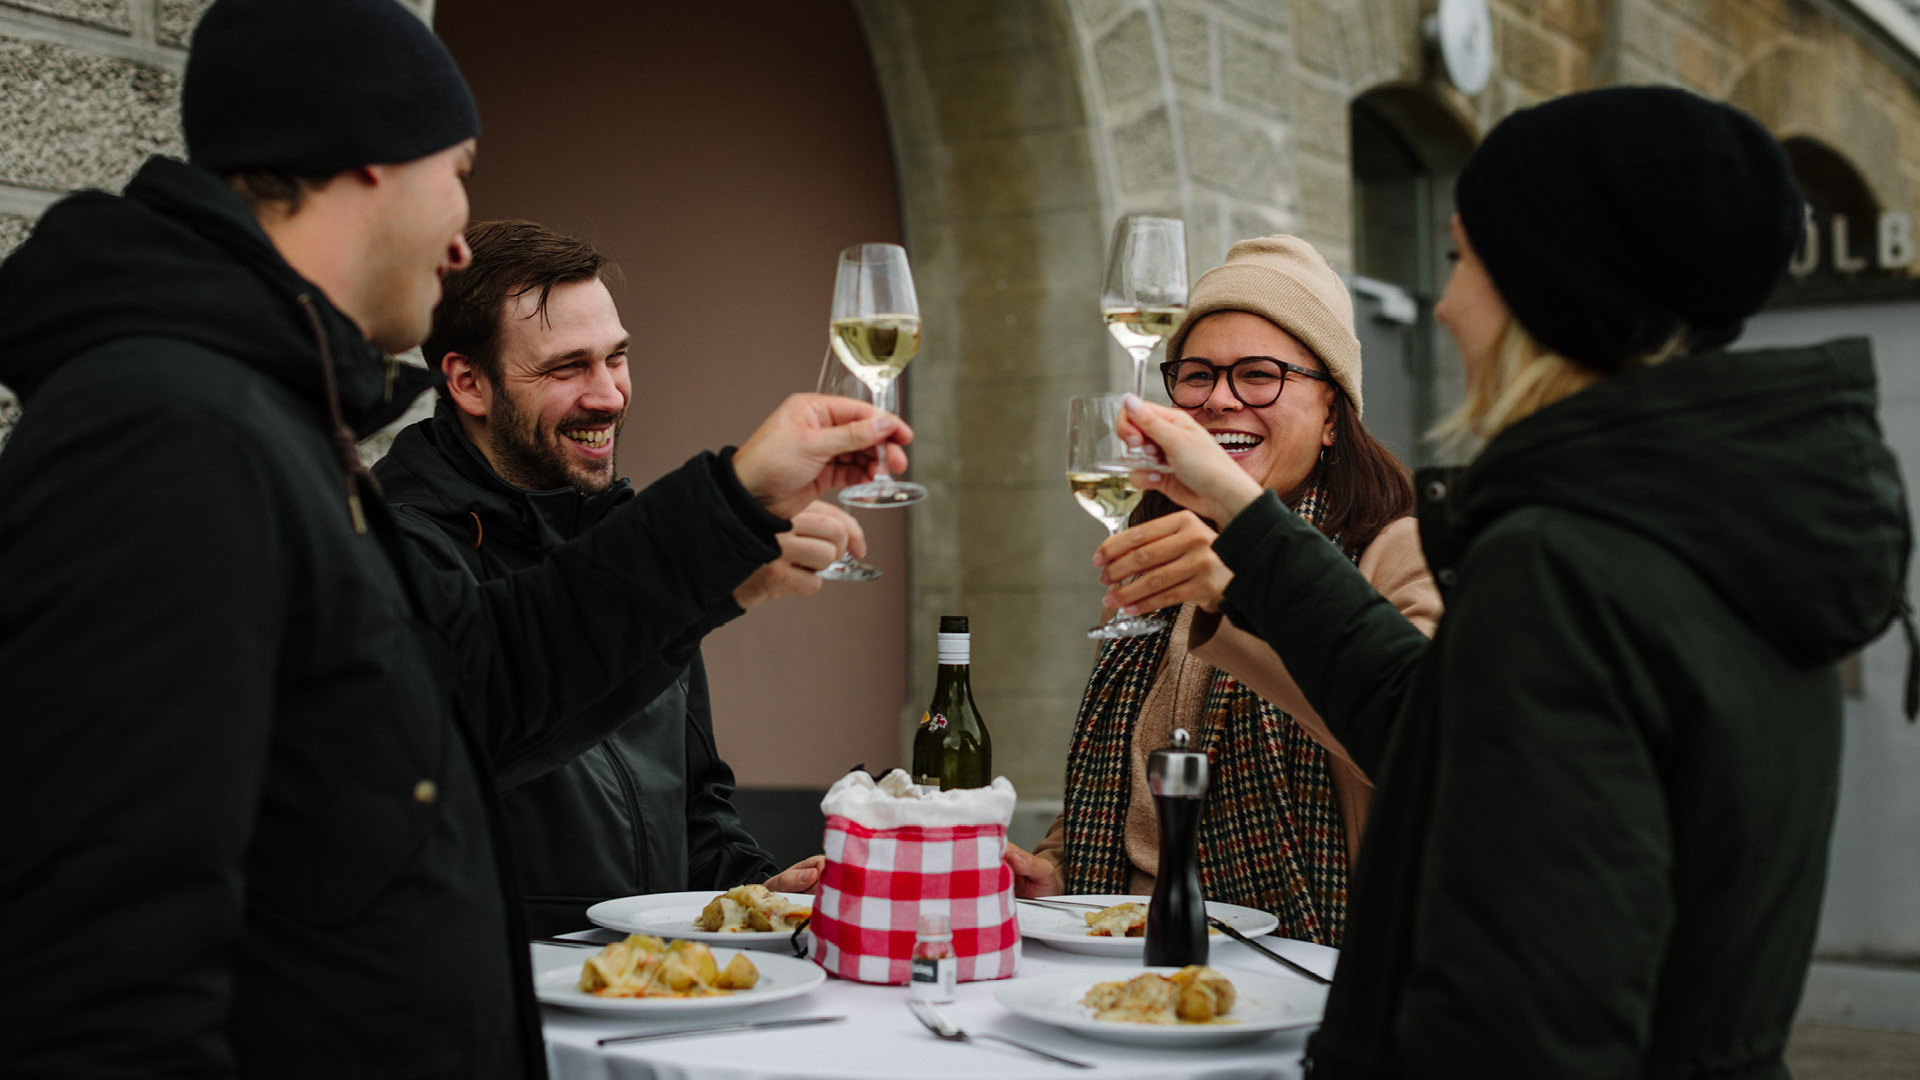 A group raising their glasses in a toast over an outdoor raclette on the Gurten